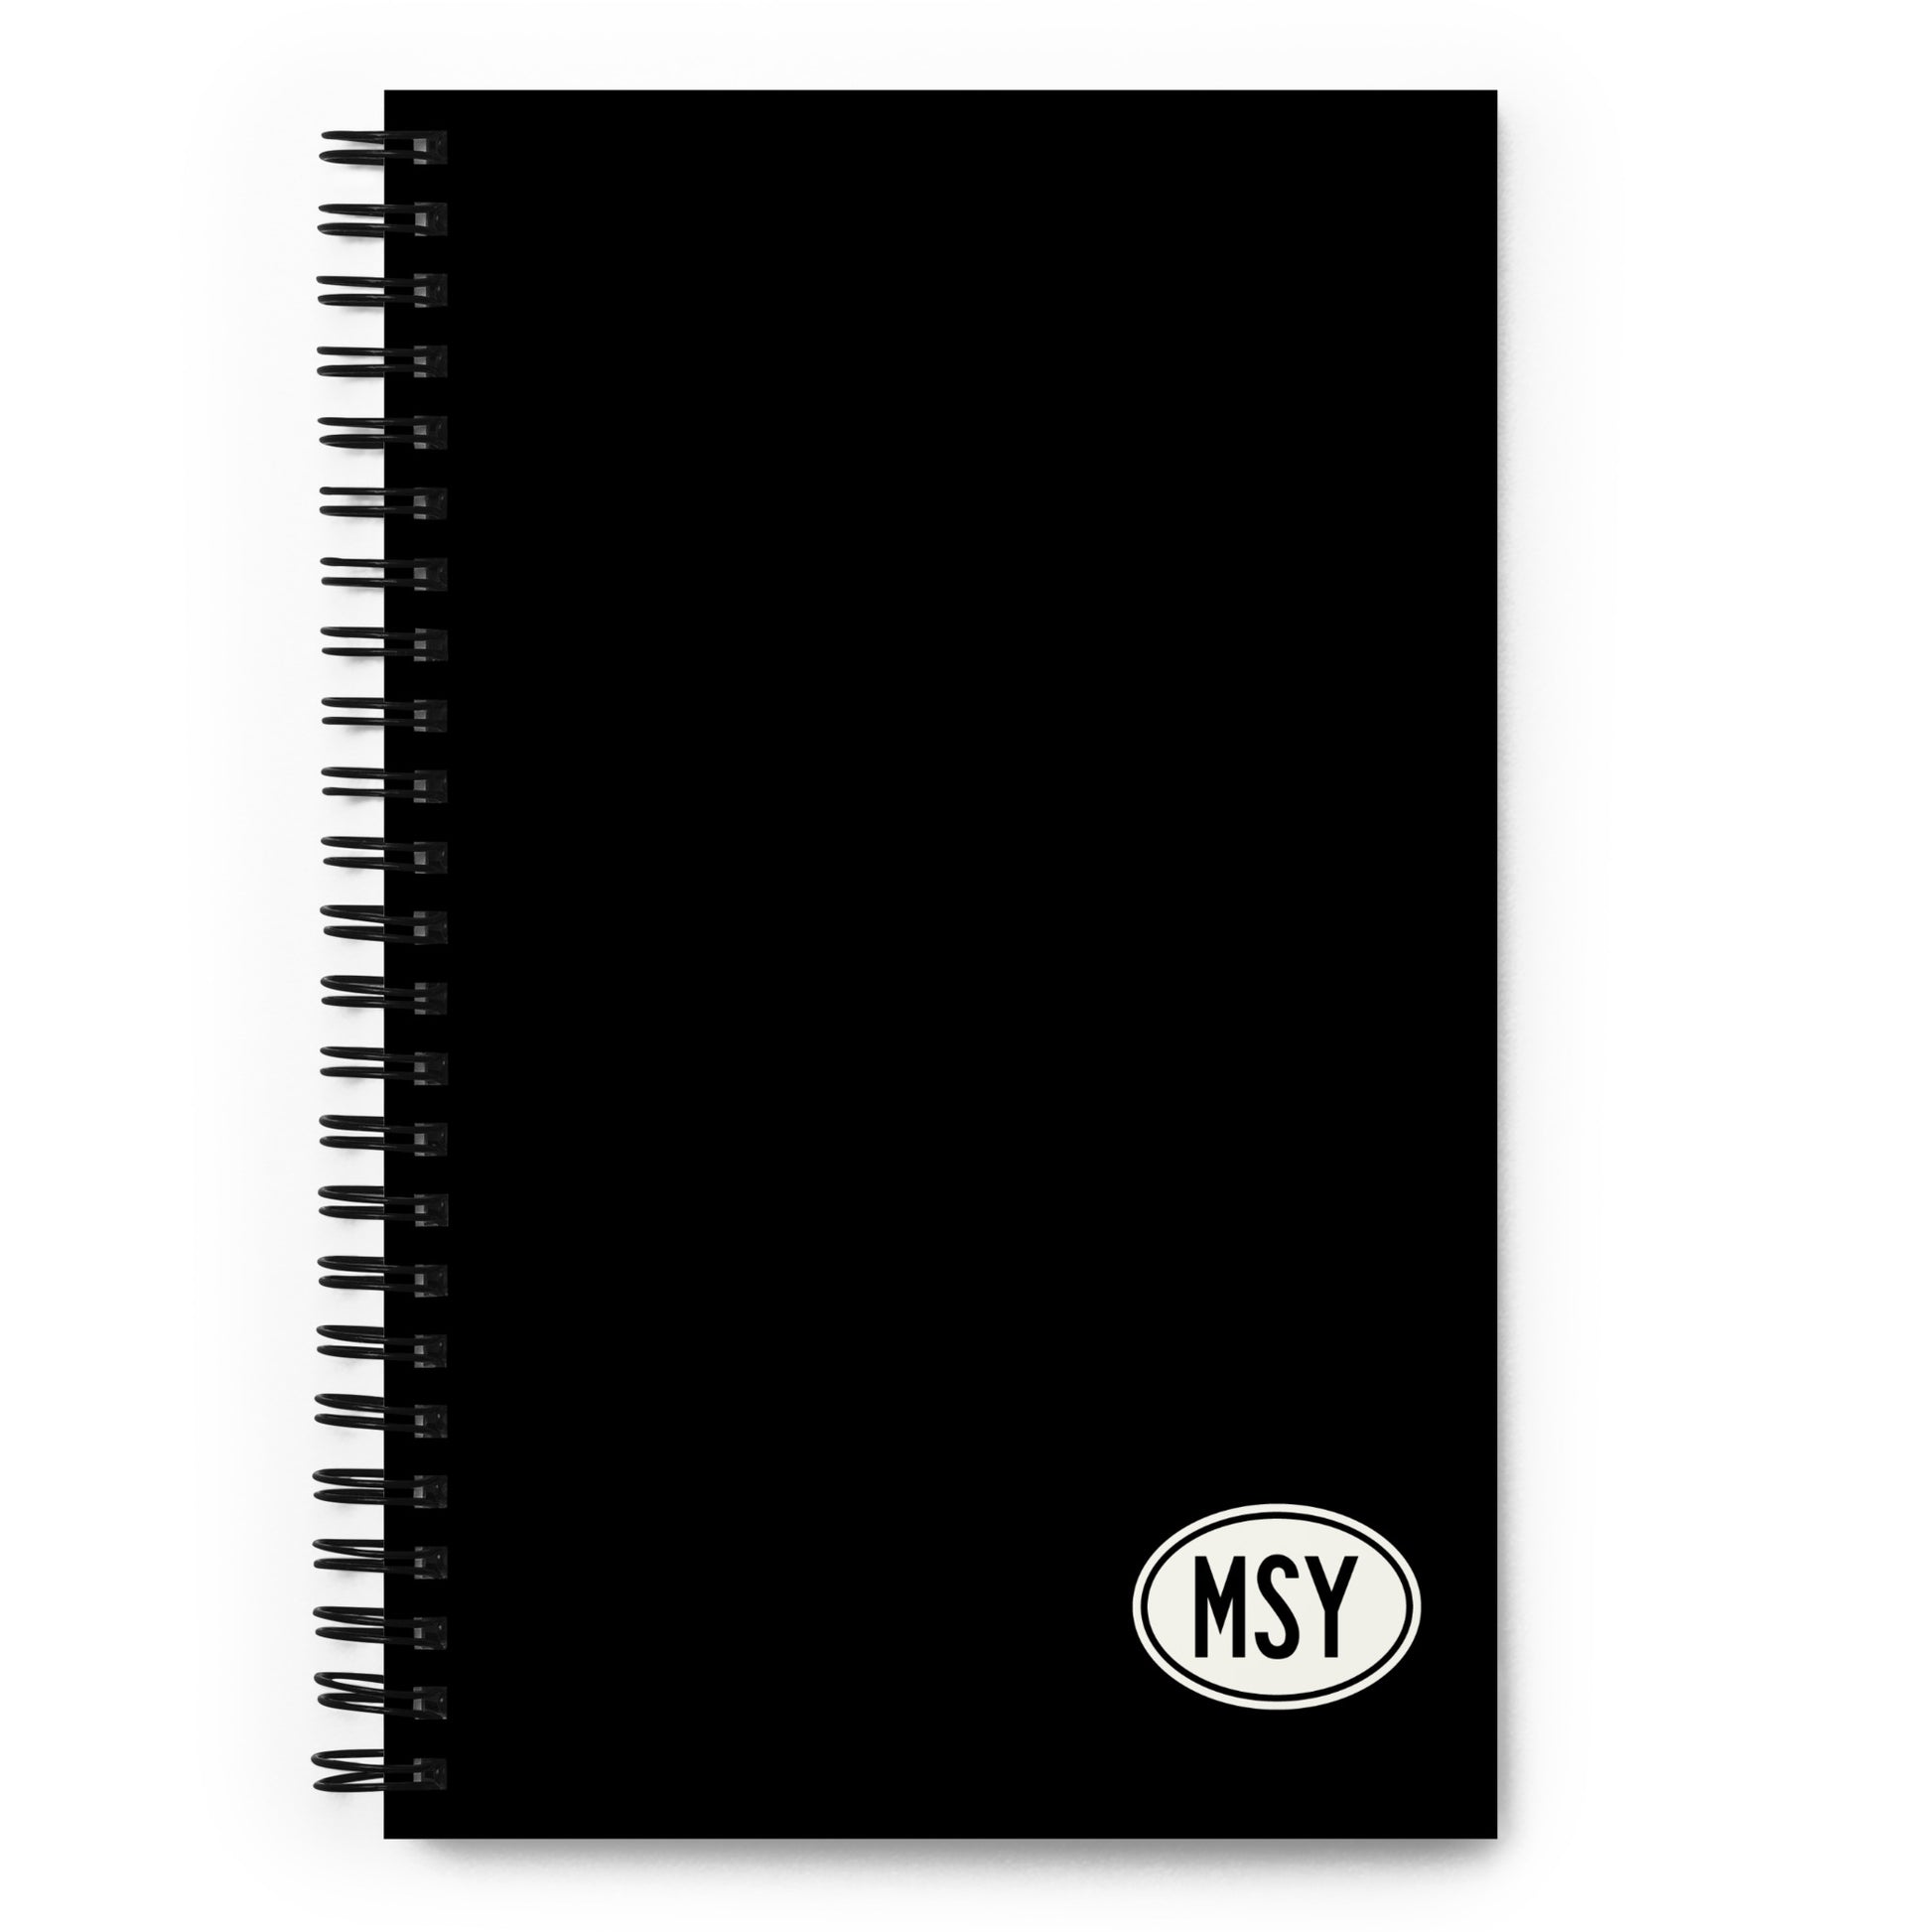 Unique Travel Gift Spiral Notebook - White Oval • MSY New Orleans • YHM Designs - Image 01